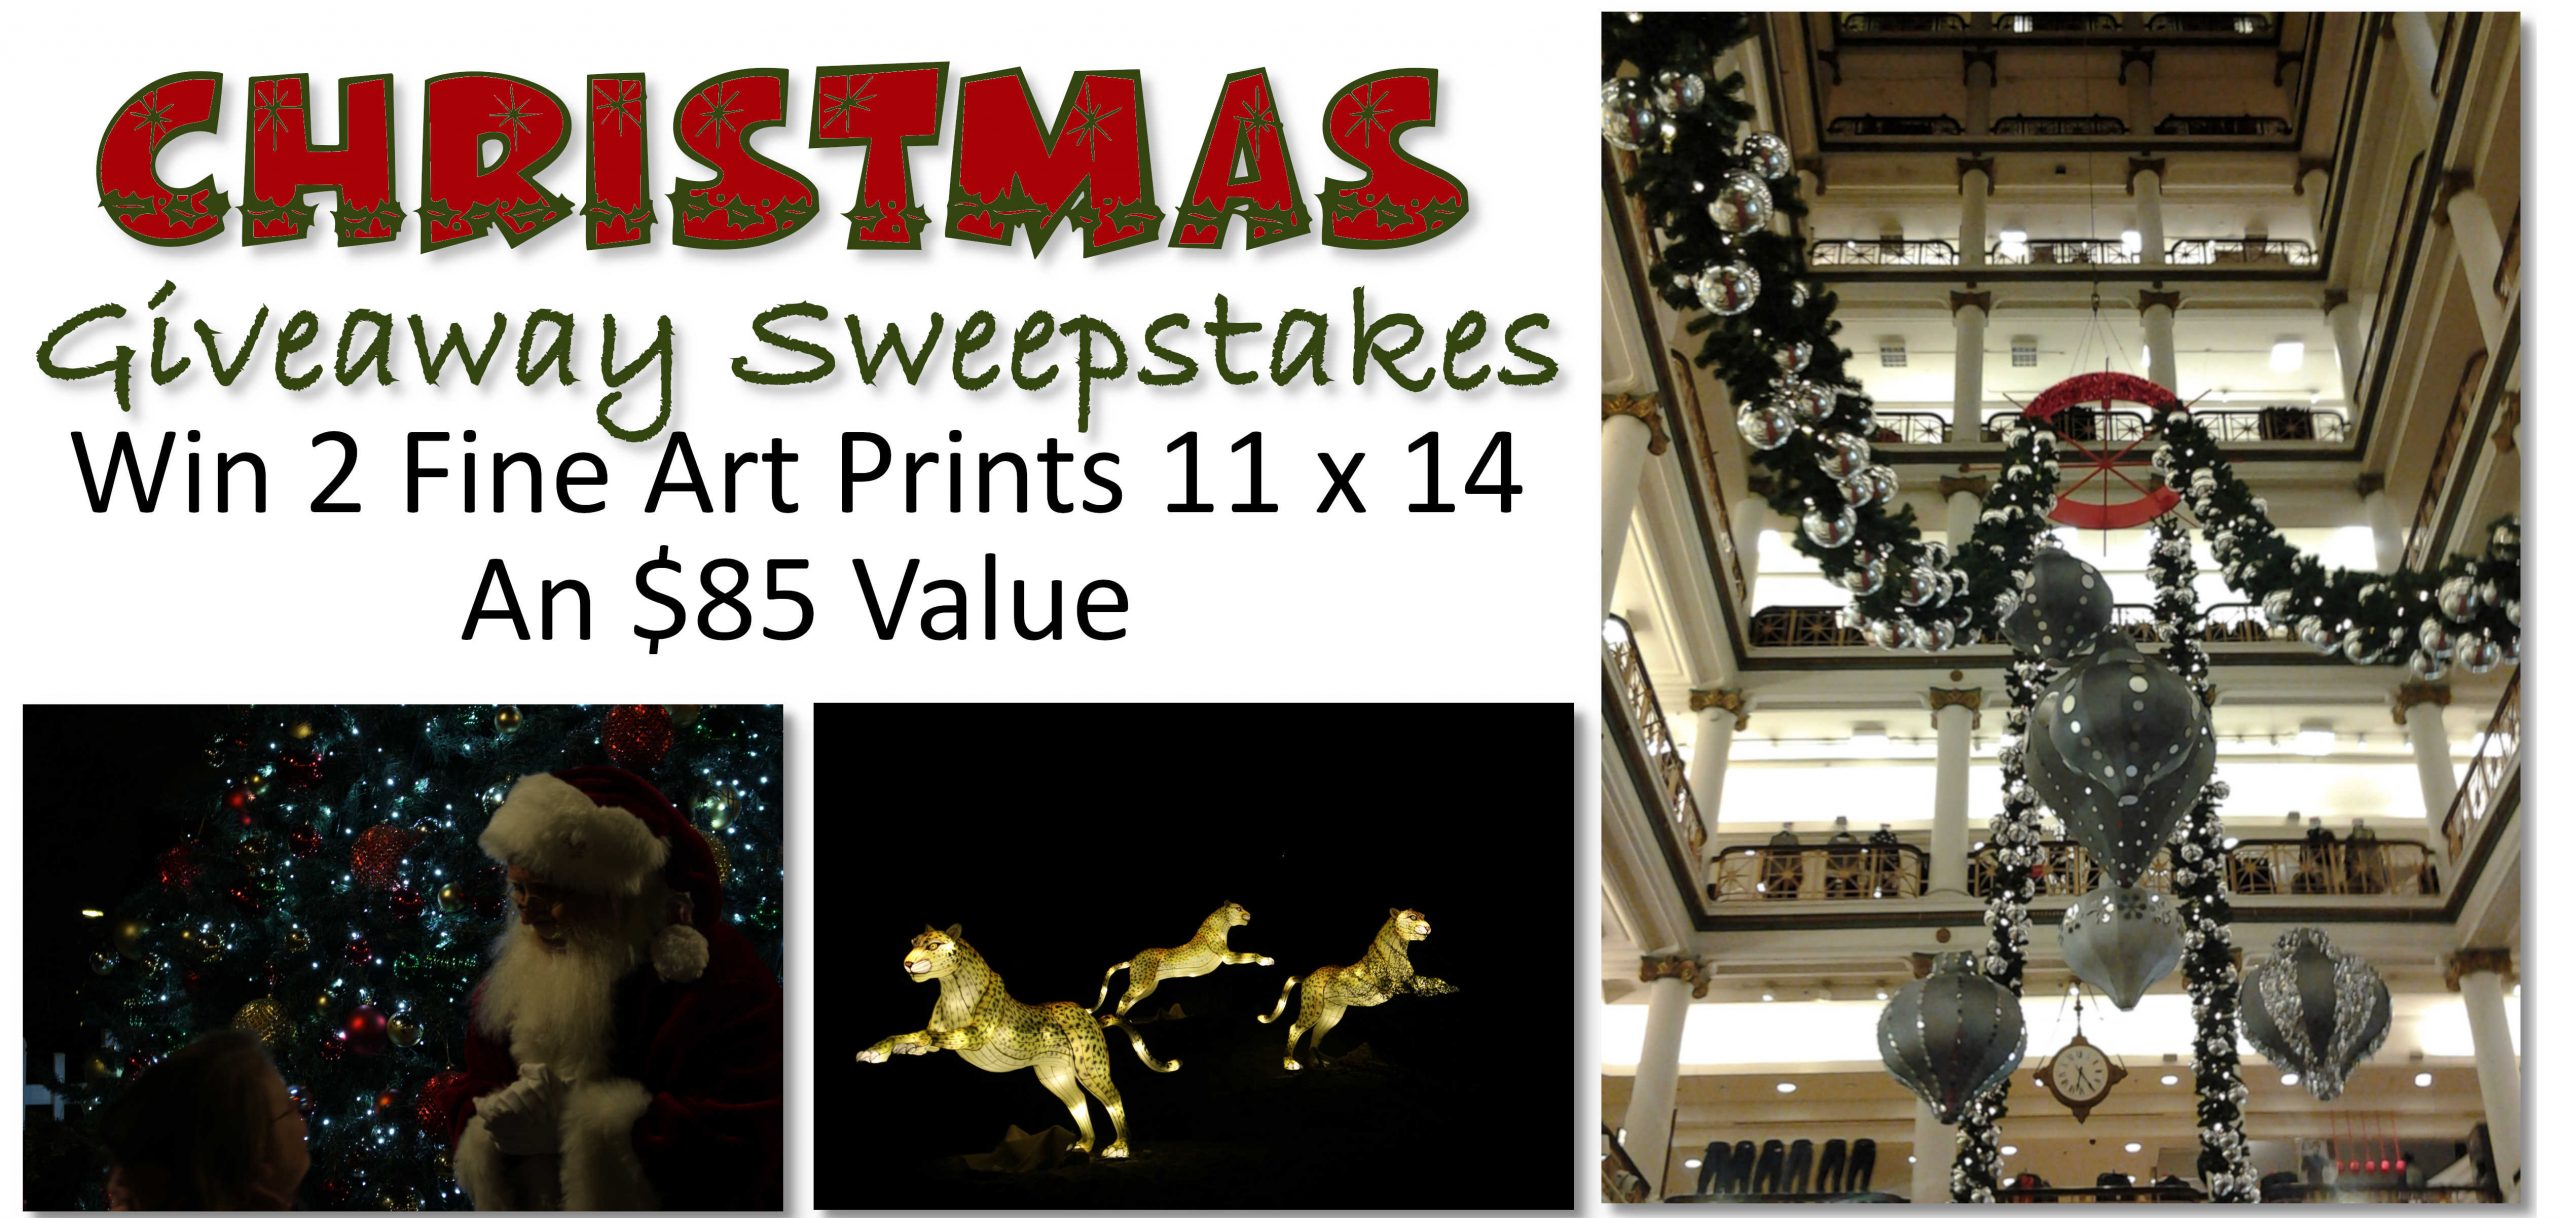 TWO 11 x 14 (or 14 x 11) unframed Fine Art Photographs or Digital Art Prints Giveaway